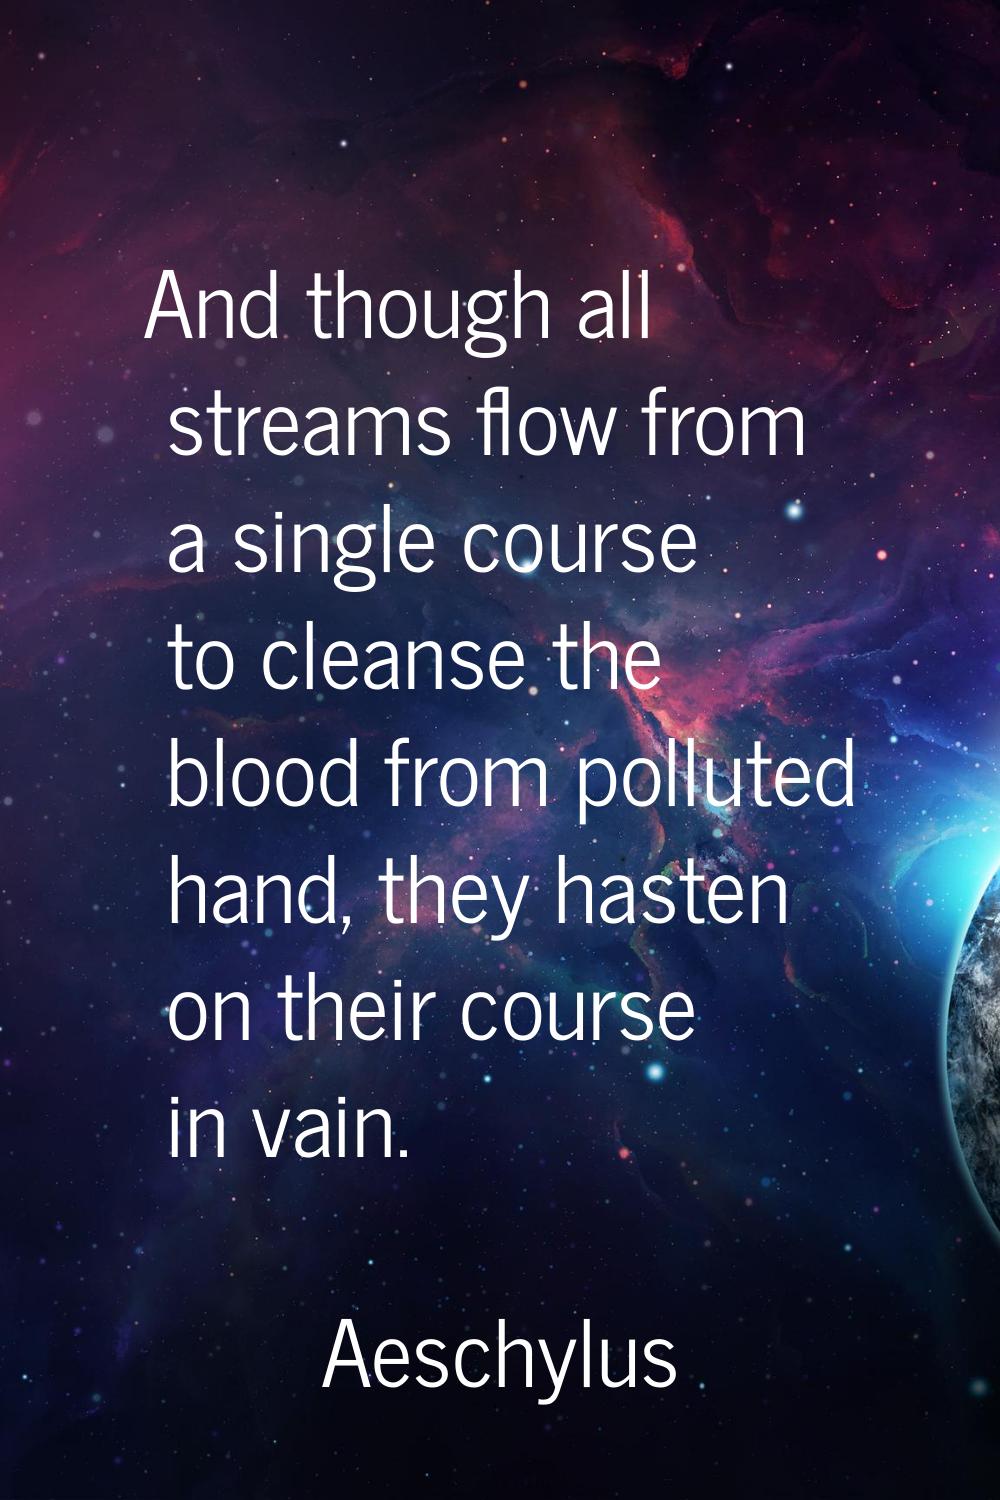 And though all streams flow from a single course to cleanse the blood from polluted hand, they hast